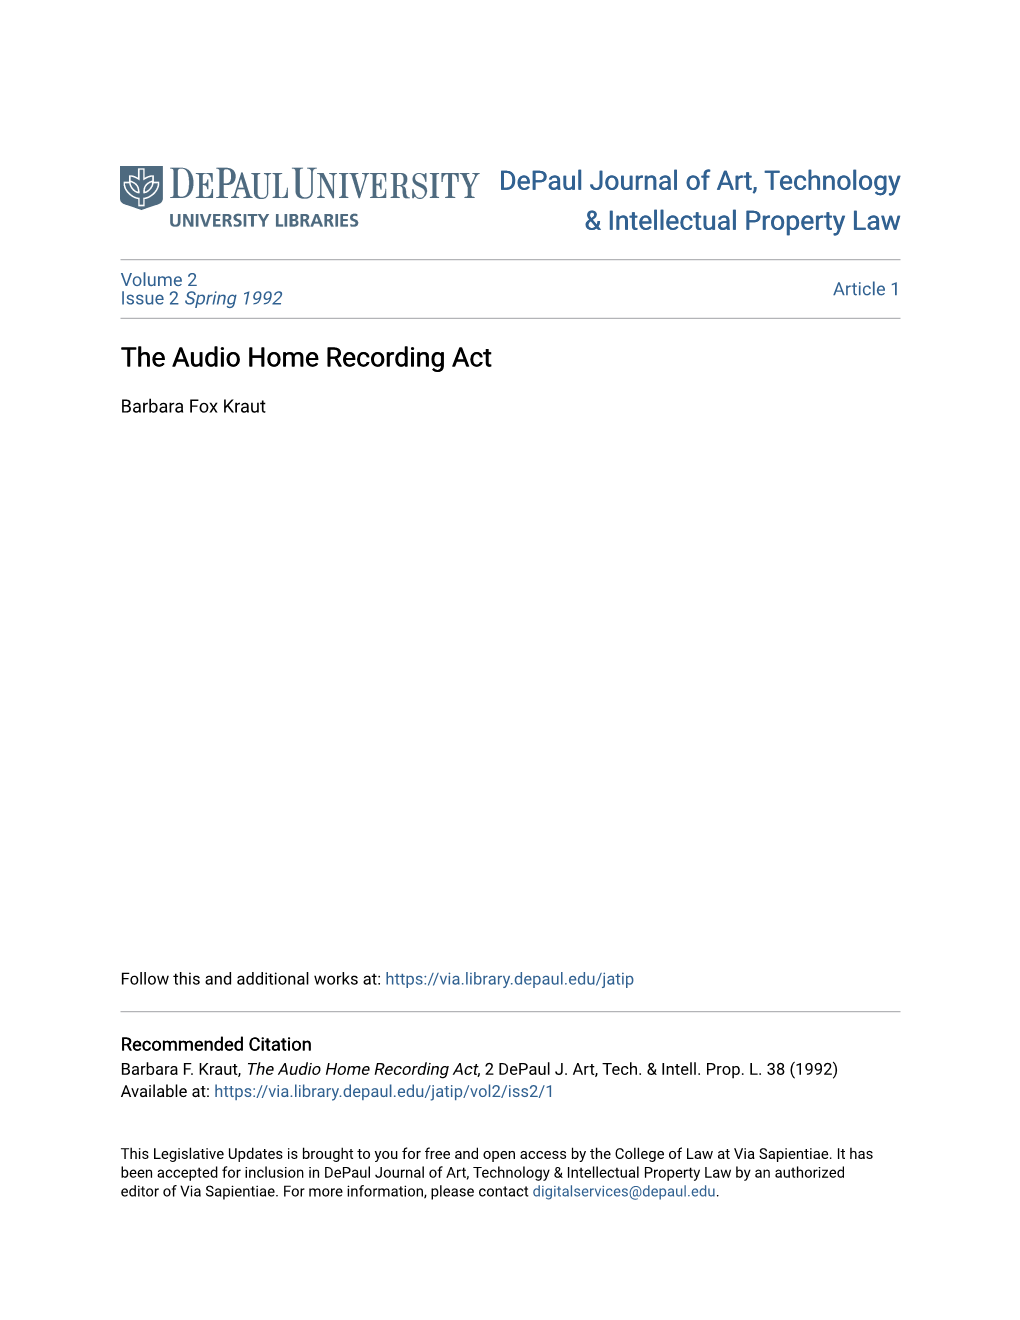 The Audio Home Recording Act